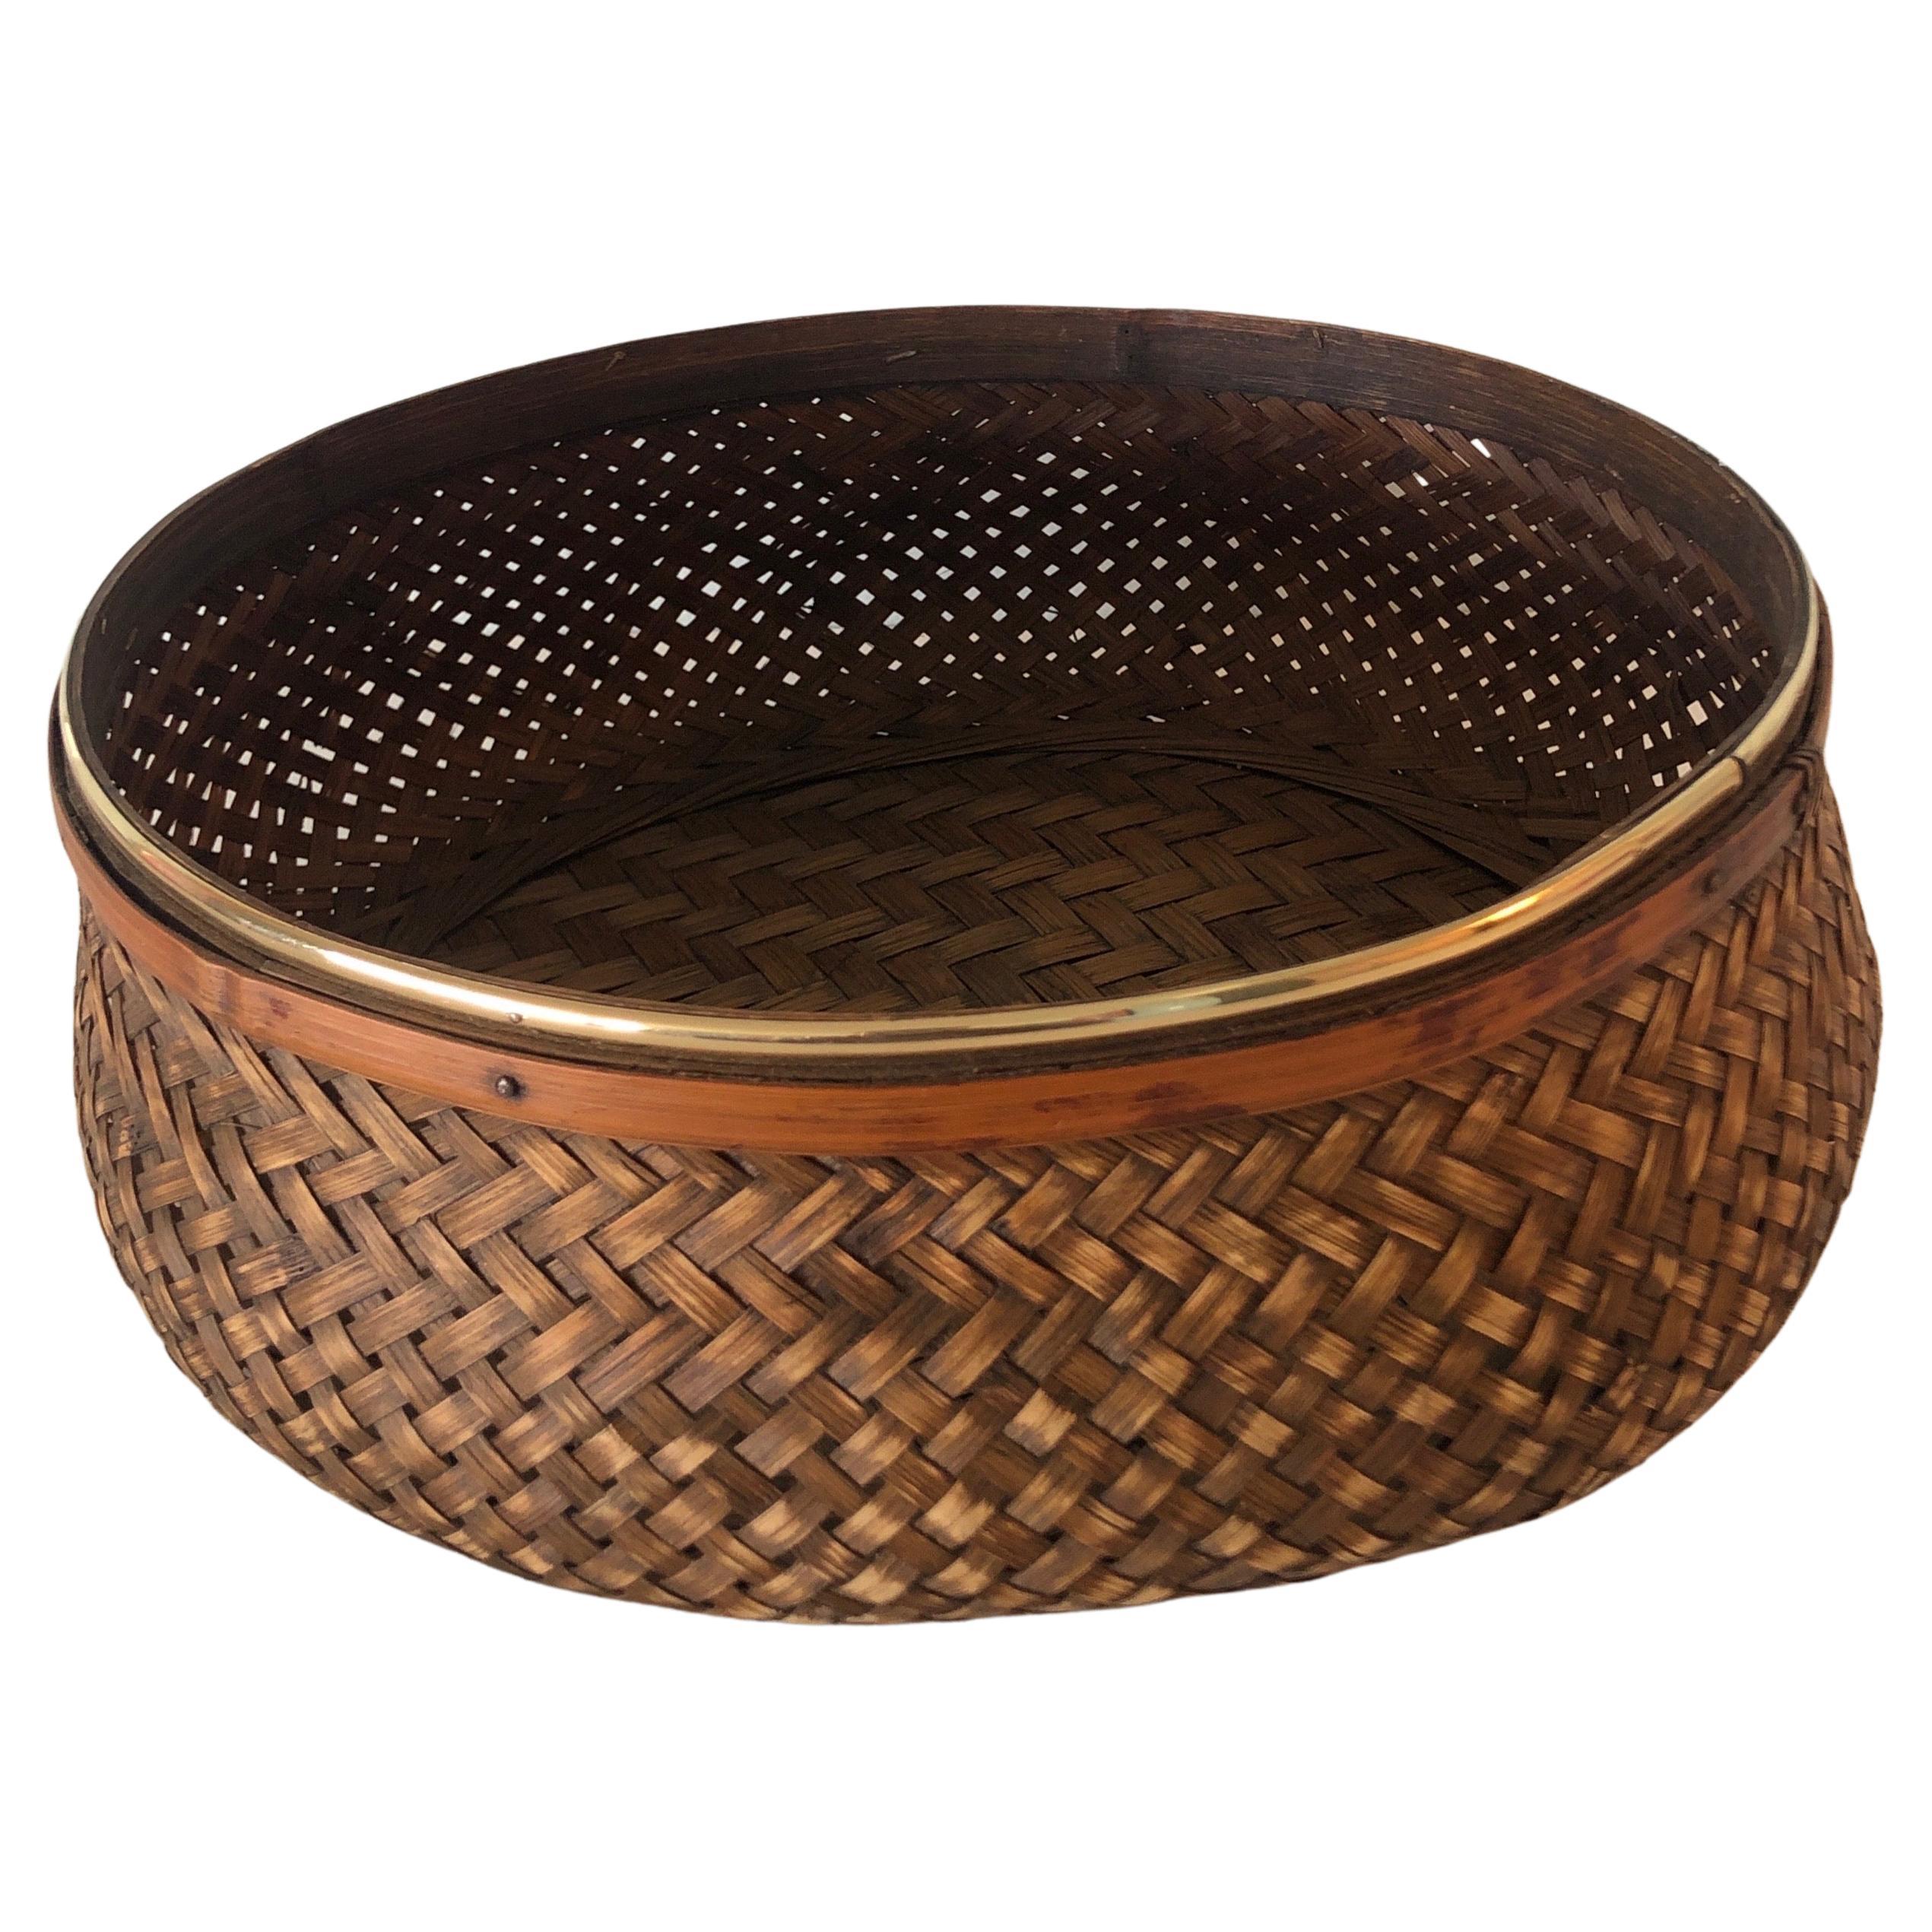 Woven Asian Round Serving Basket